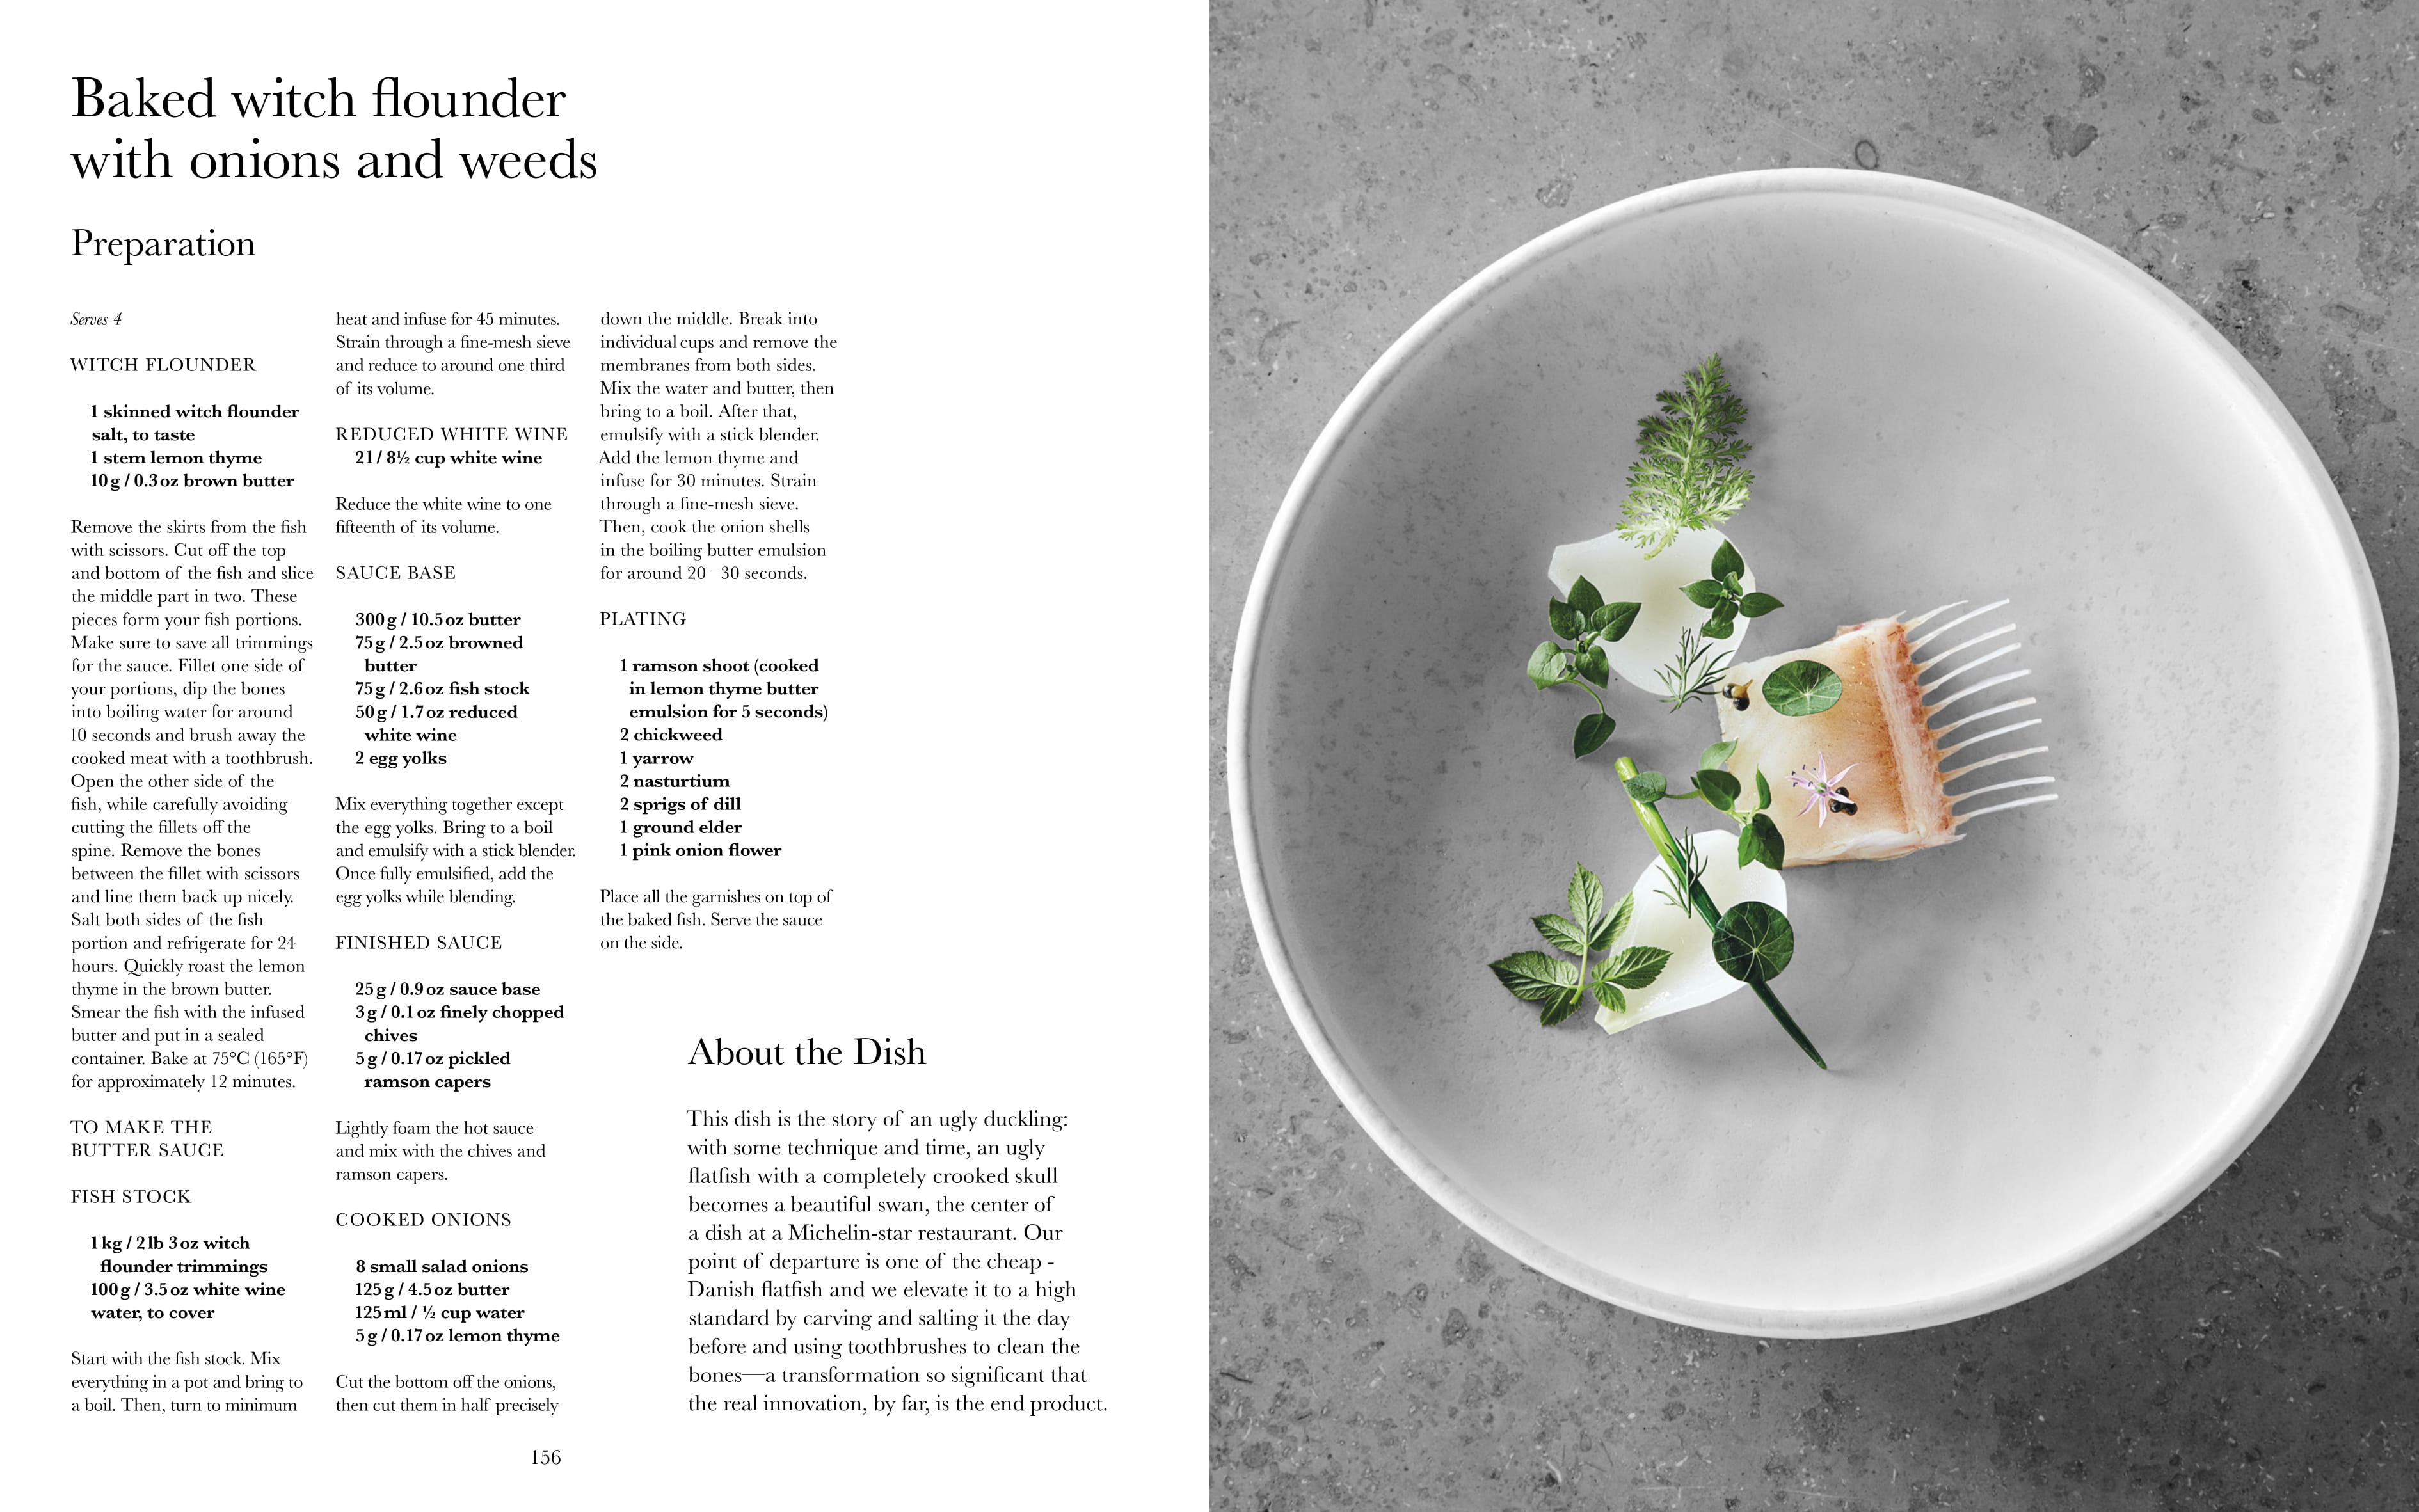 By Borderless Co. from Nordic by Nature. Nordic Cuisine and Culinary Excursions copyright Gestalten 2018